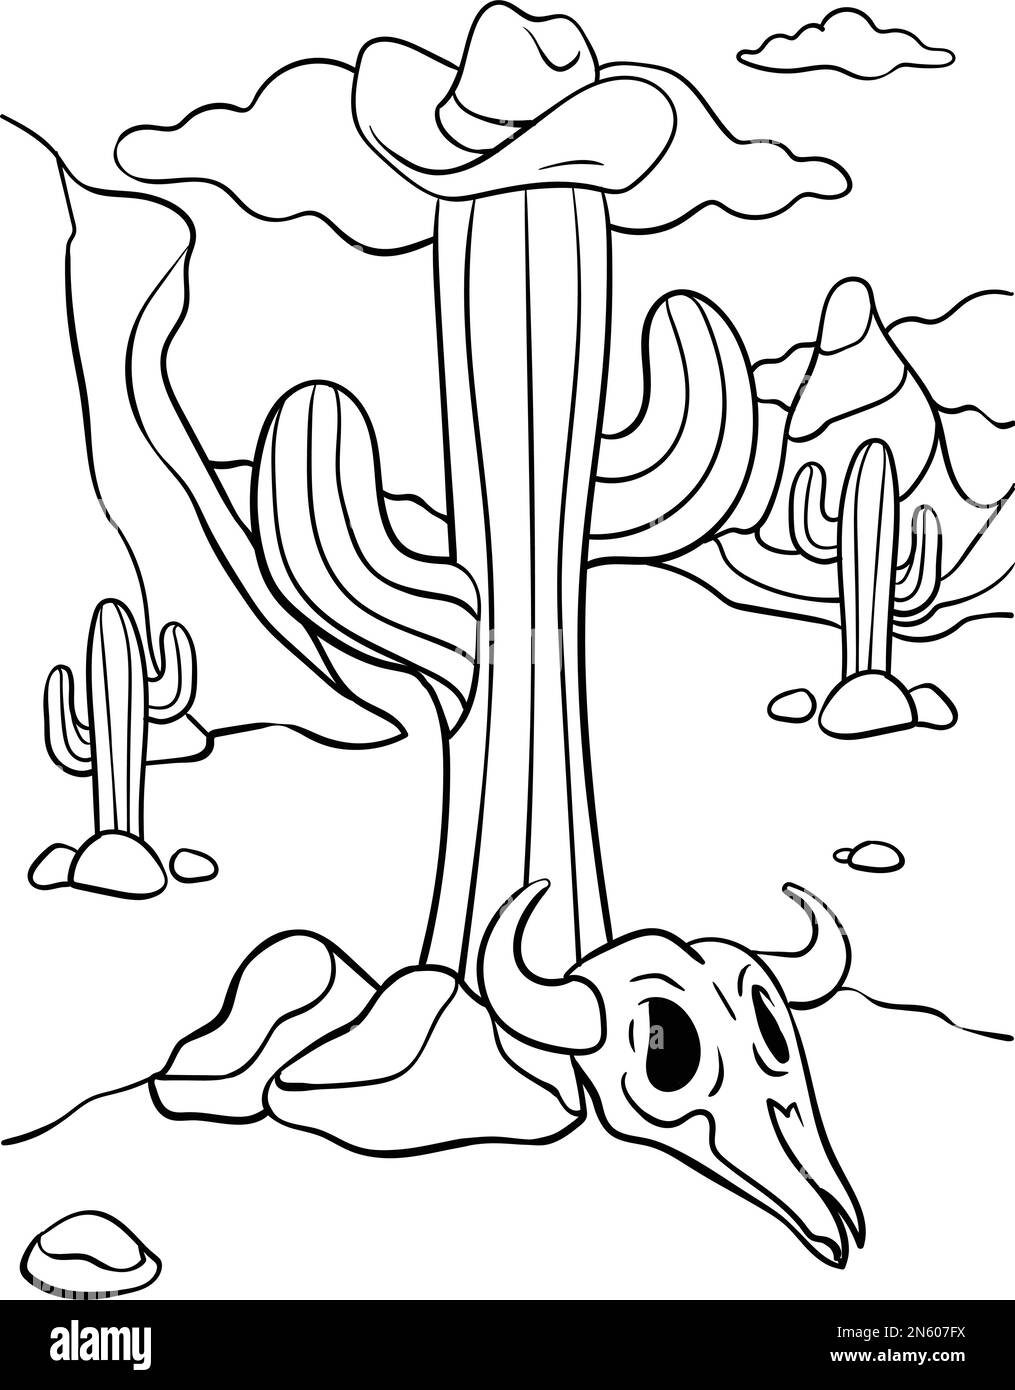 Cowboy Hat, Cactus, and Bull Skull Coloring Page  Stock Vector